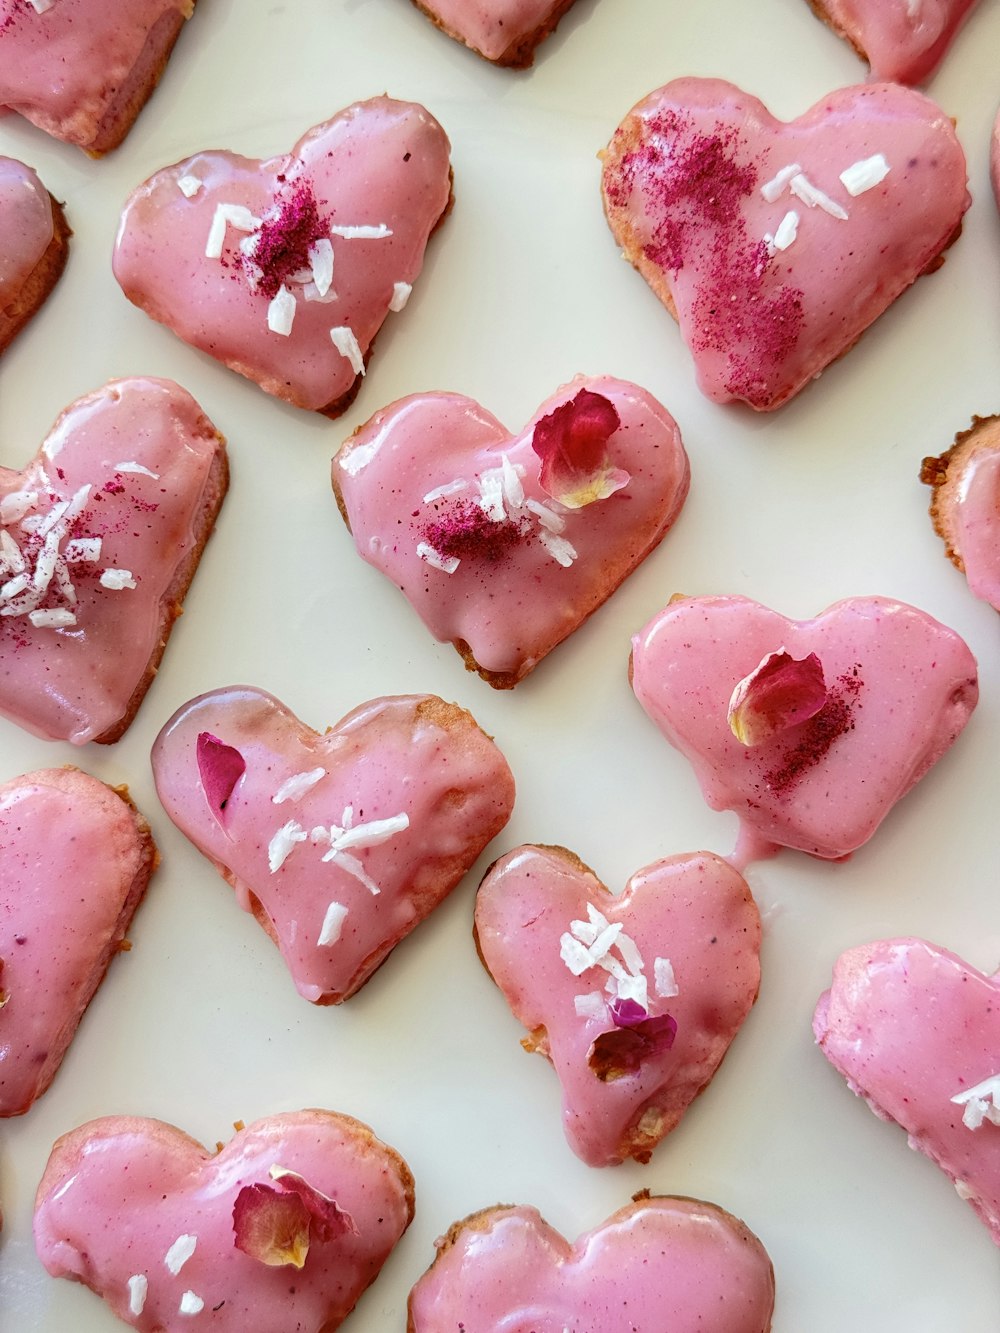 heart shaped pastries with pink icing and white sprinkles